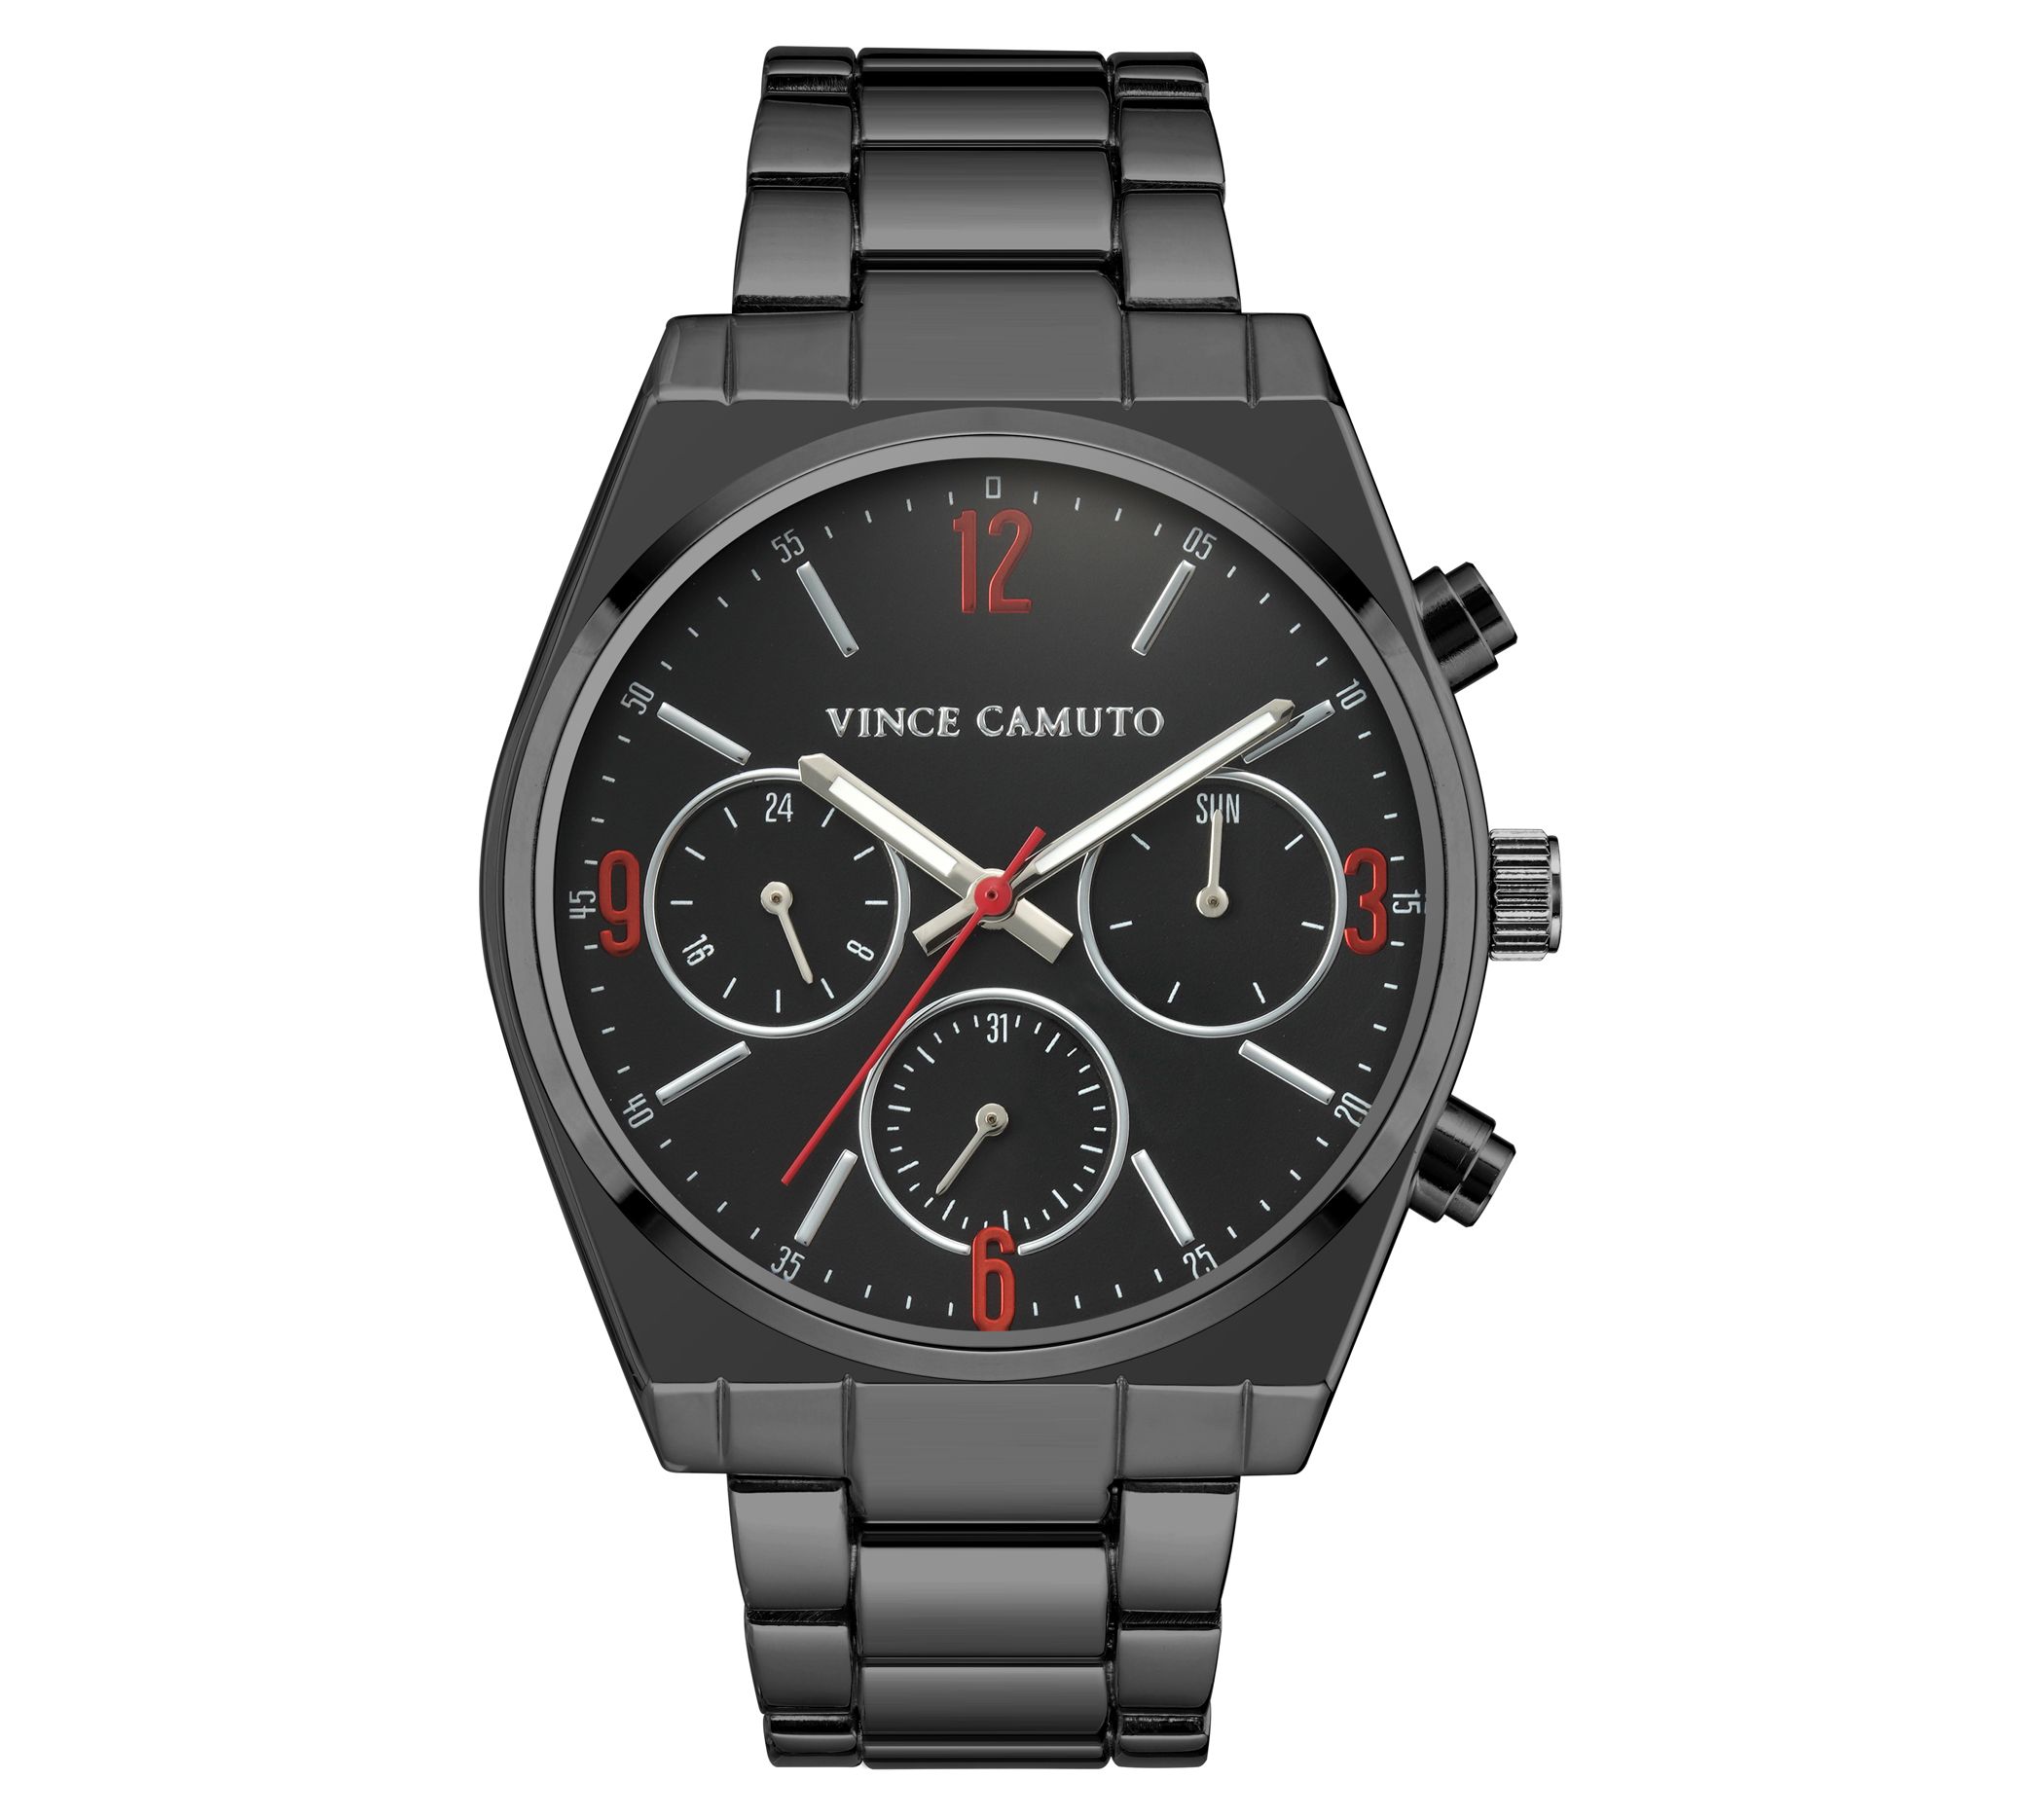 Vince Camuto Men's Black Stainless Steel Watch - QVC.com